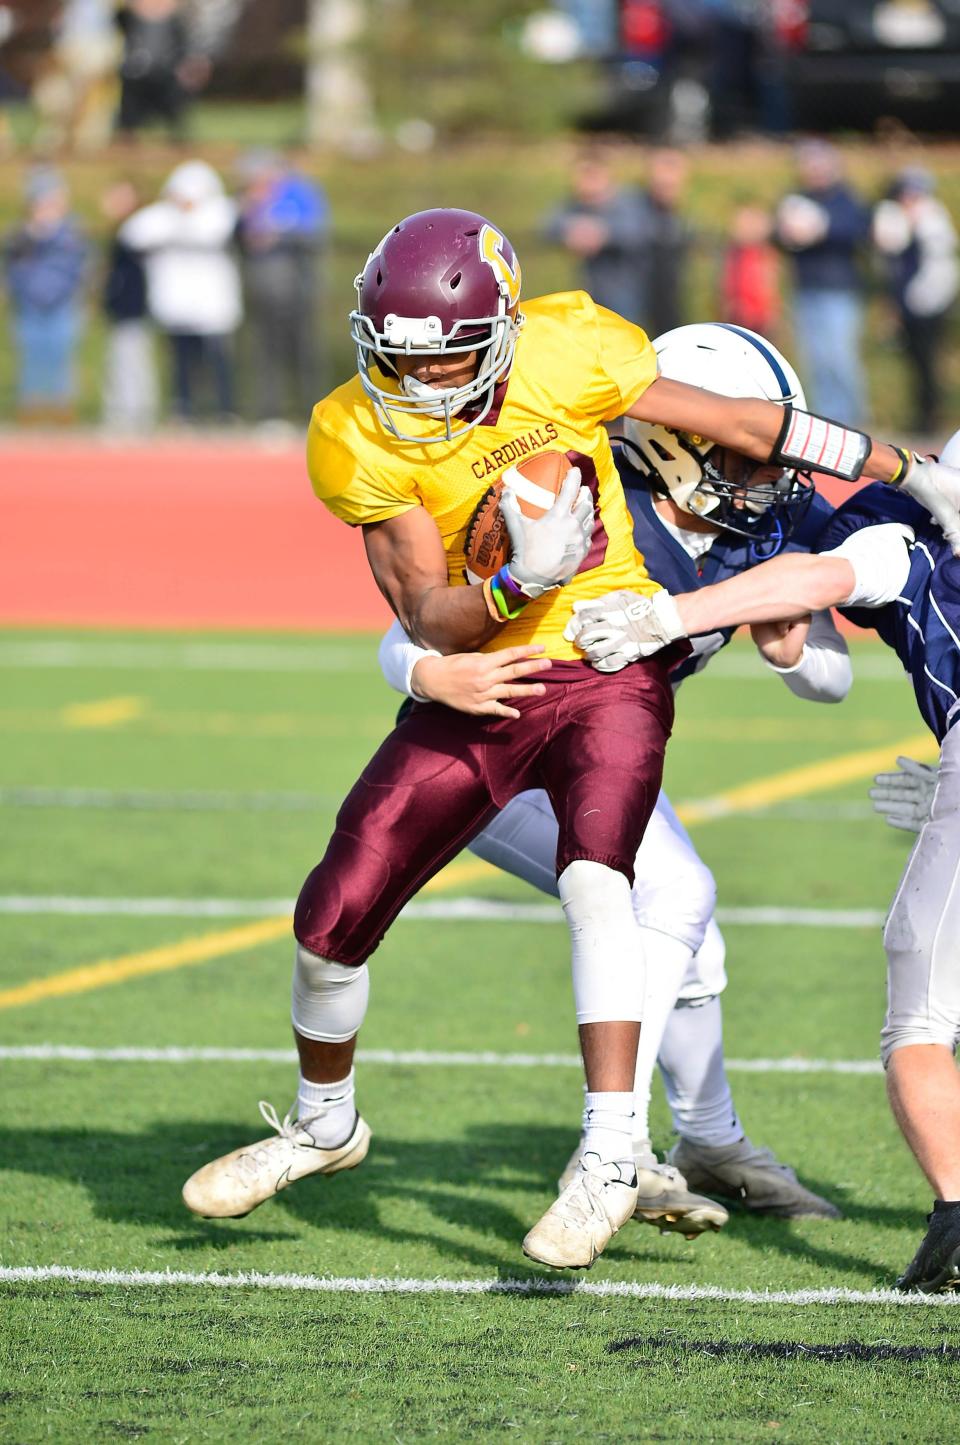 Joseph Case High School battles Somerset in the last Thanksgiving Day football game at Somerset Berkley Regional High School in this file photo from 2022.